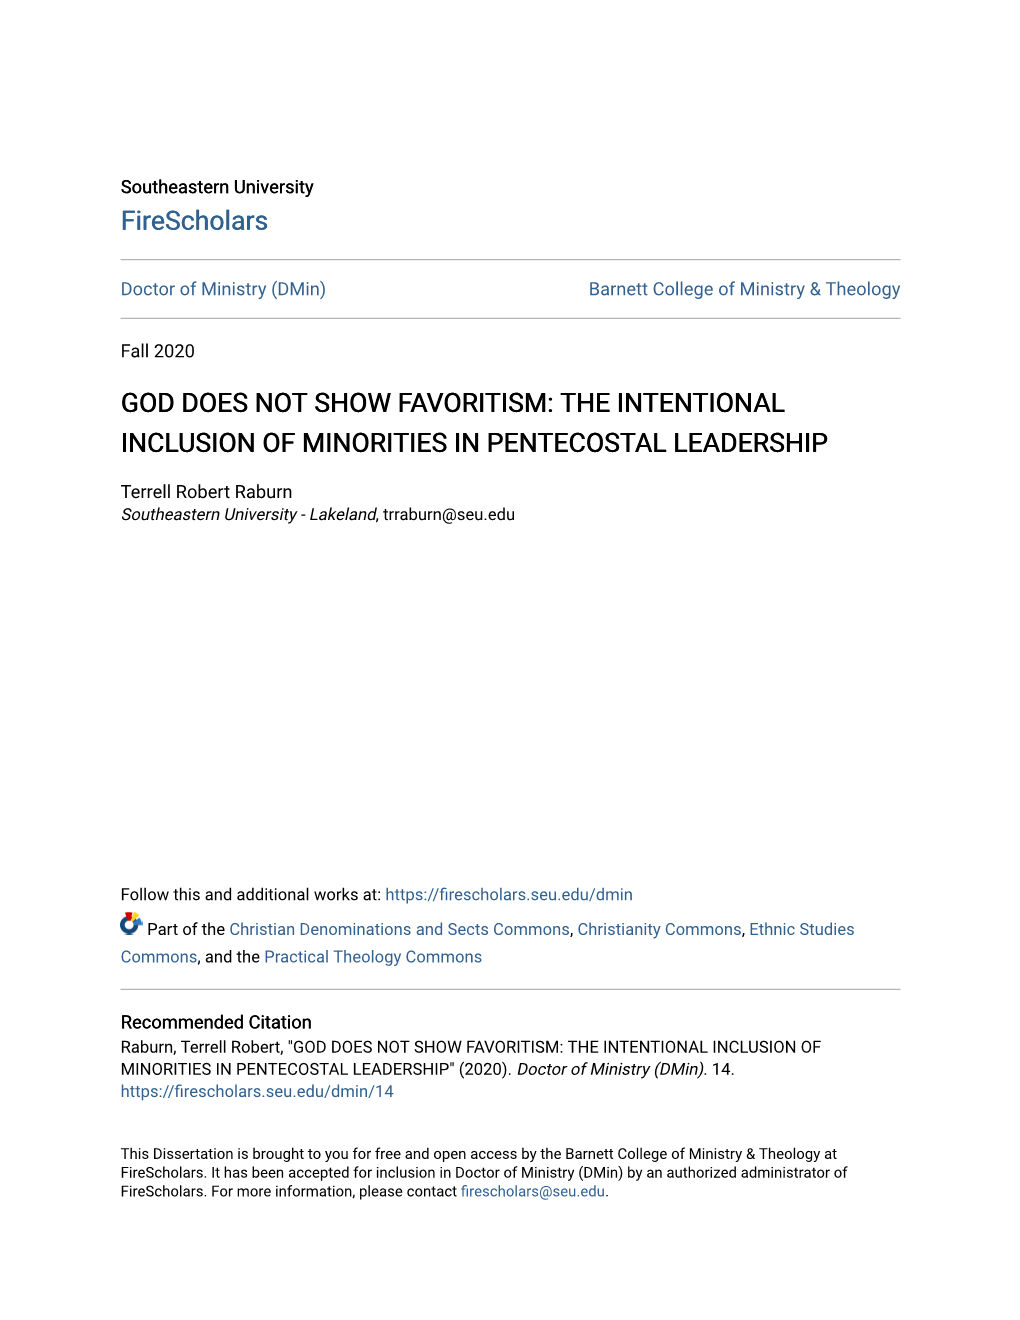 God Does Not Show Favoritism: the Intentional Inclusion of Minorities in Pentecostal Leadership